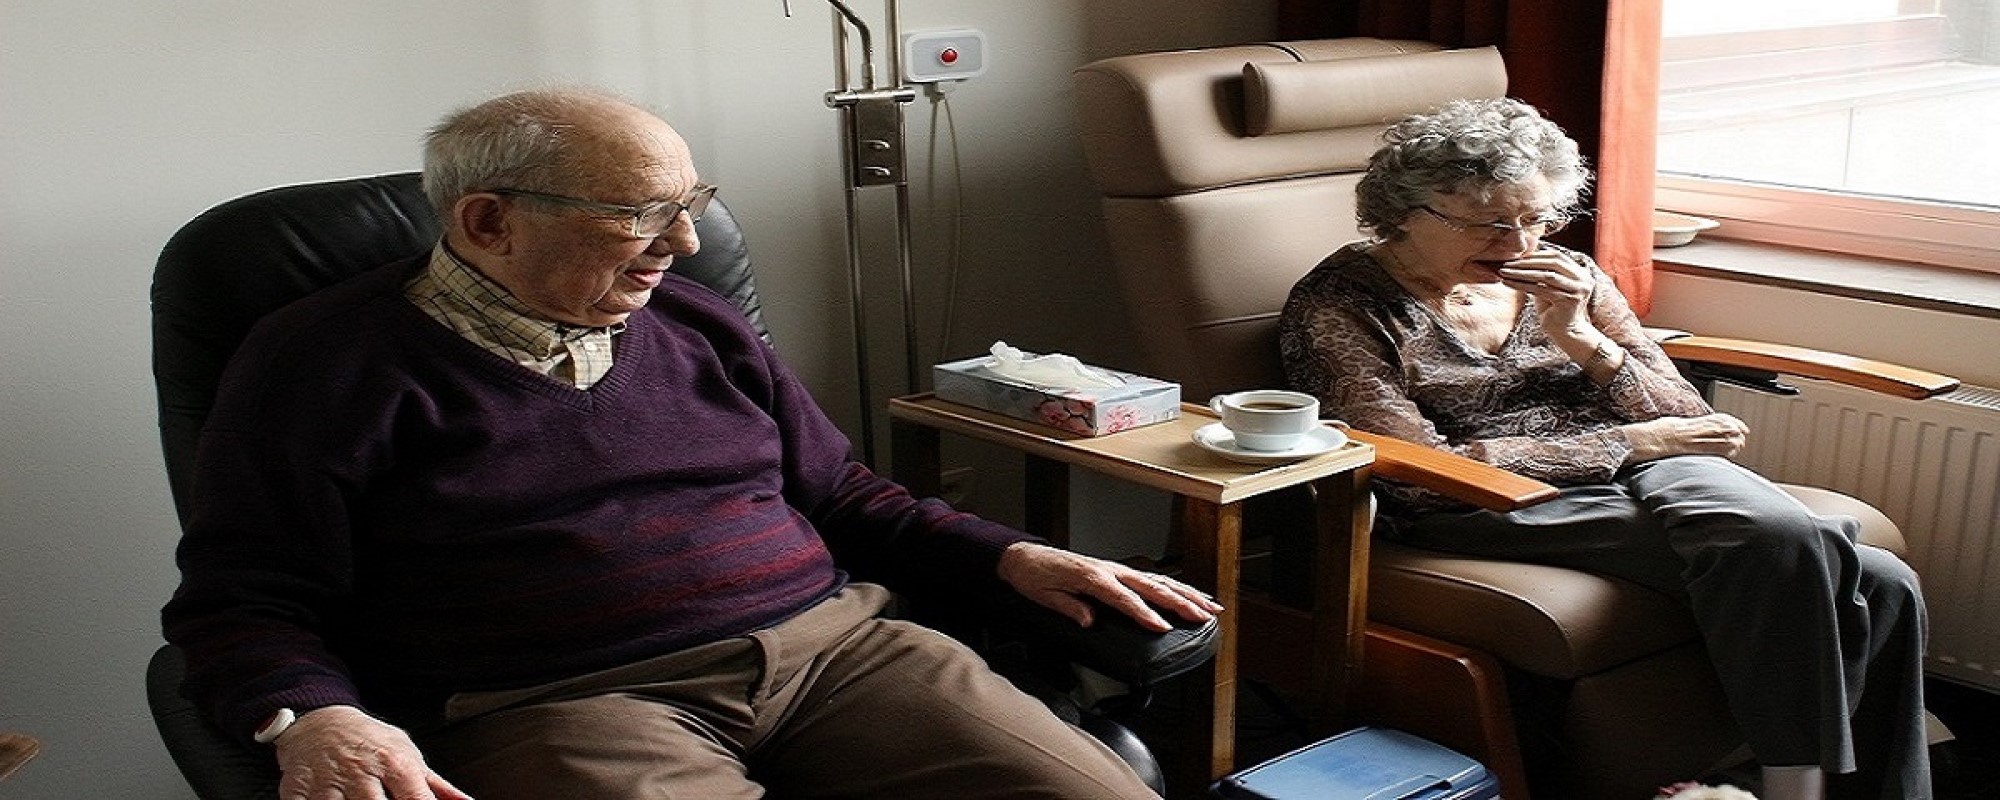 And elderly man and woman sitting on a couch